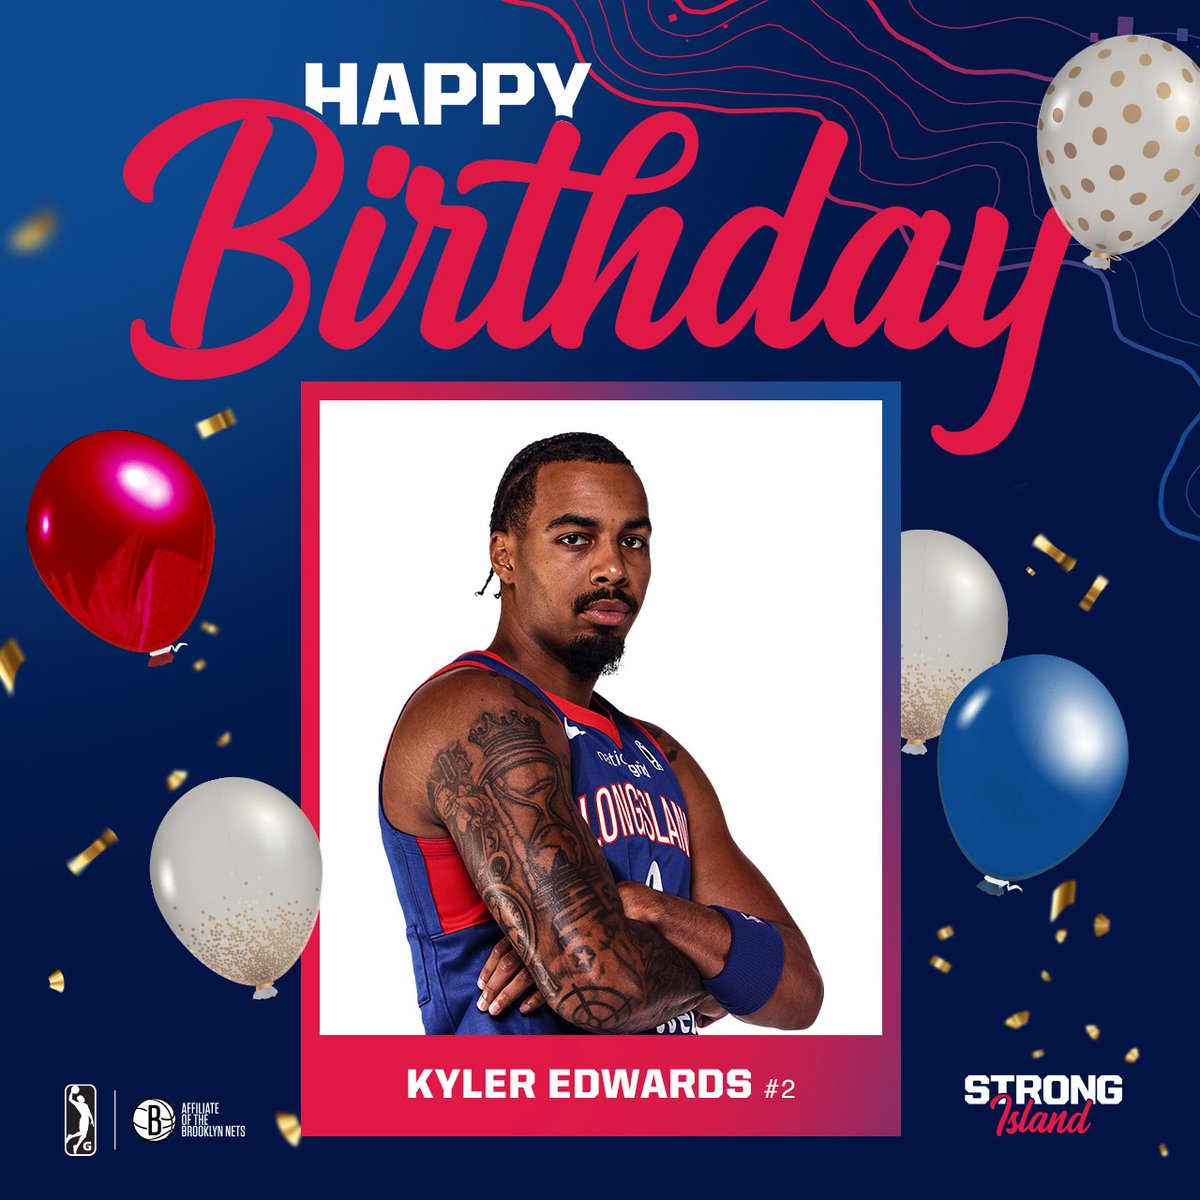 Join us in wishing Kyler Edwards a Happy Birthday! 🥳